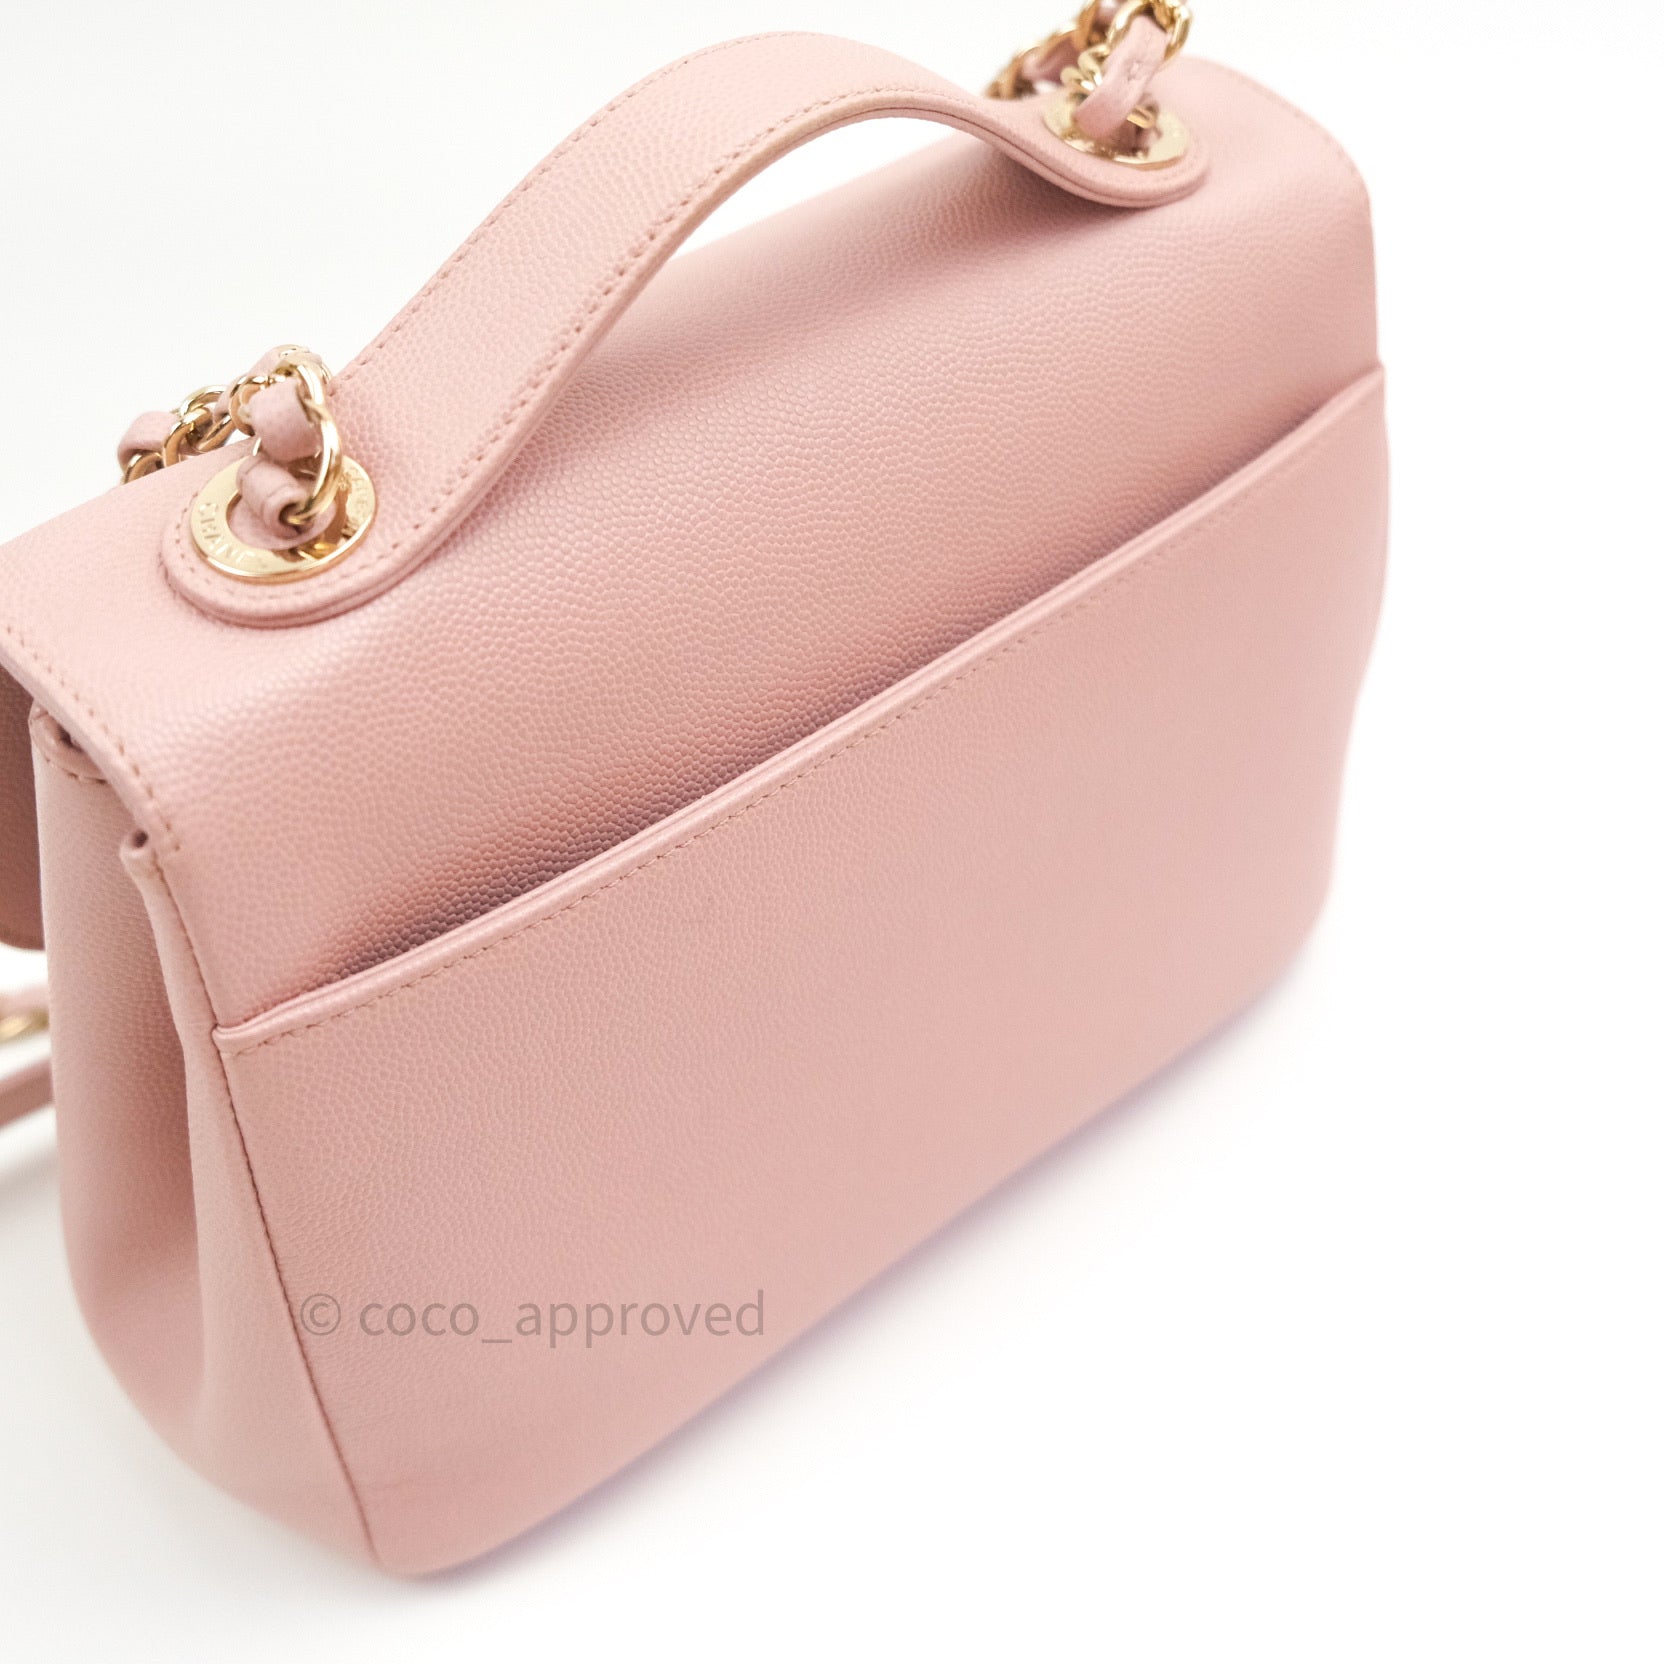 Business affinity leather handbag Chanel Pink in Leather - 35322186